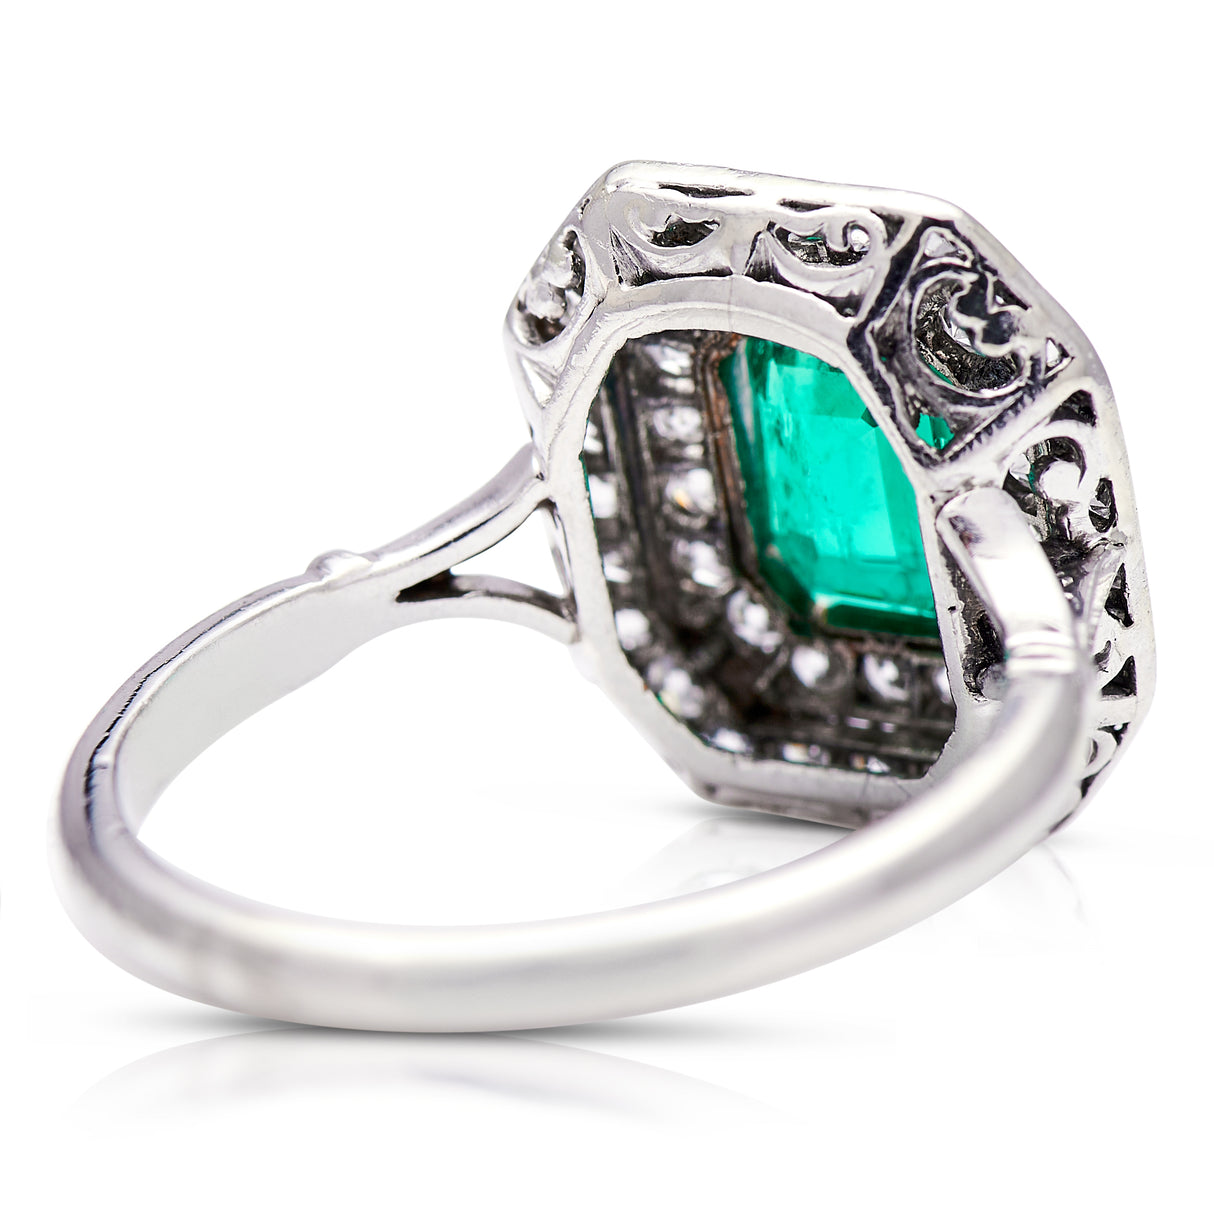 Vintage emerald and diamond cluster ring, rear view. 